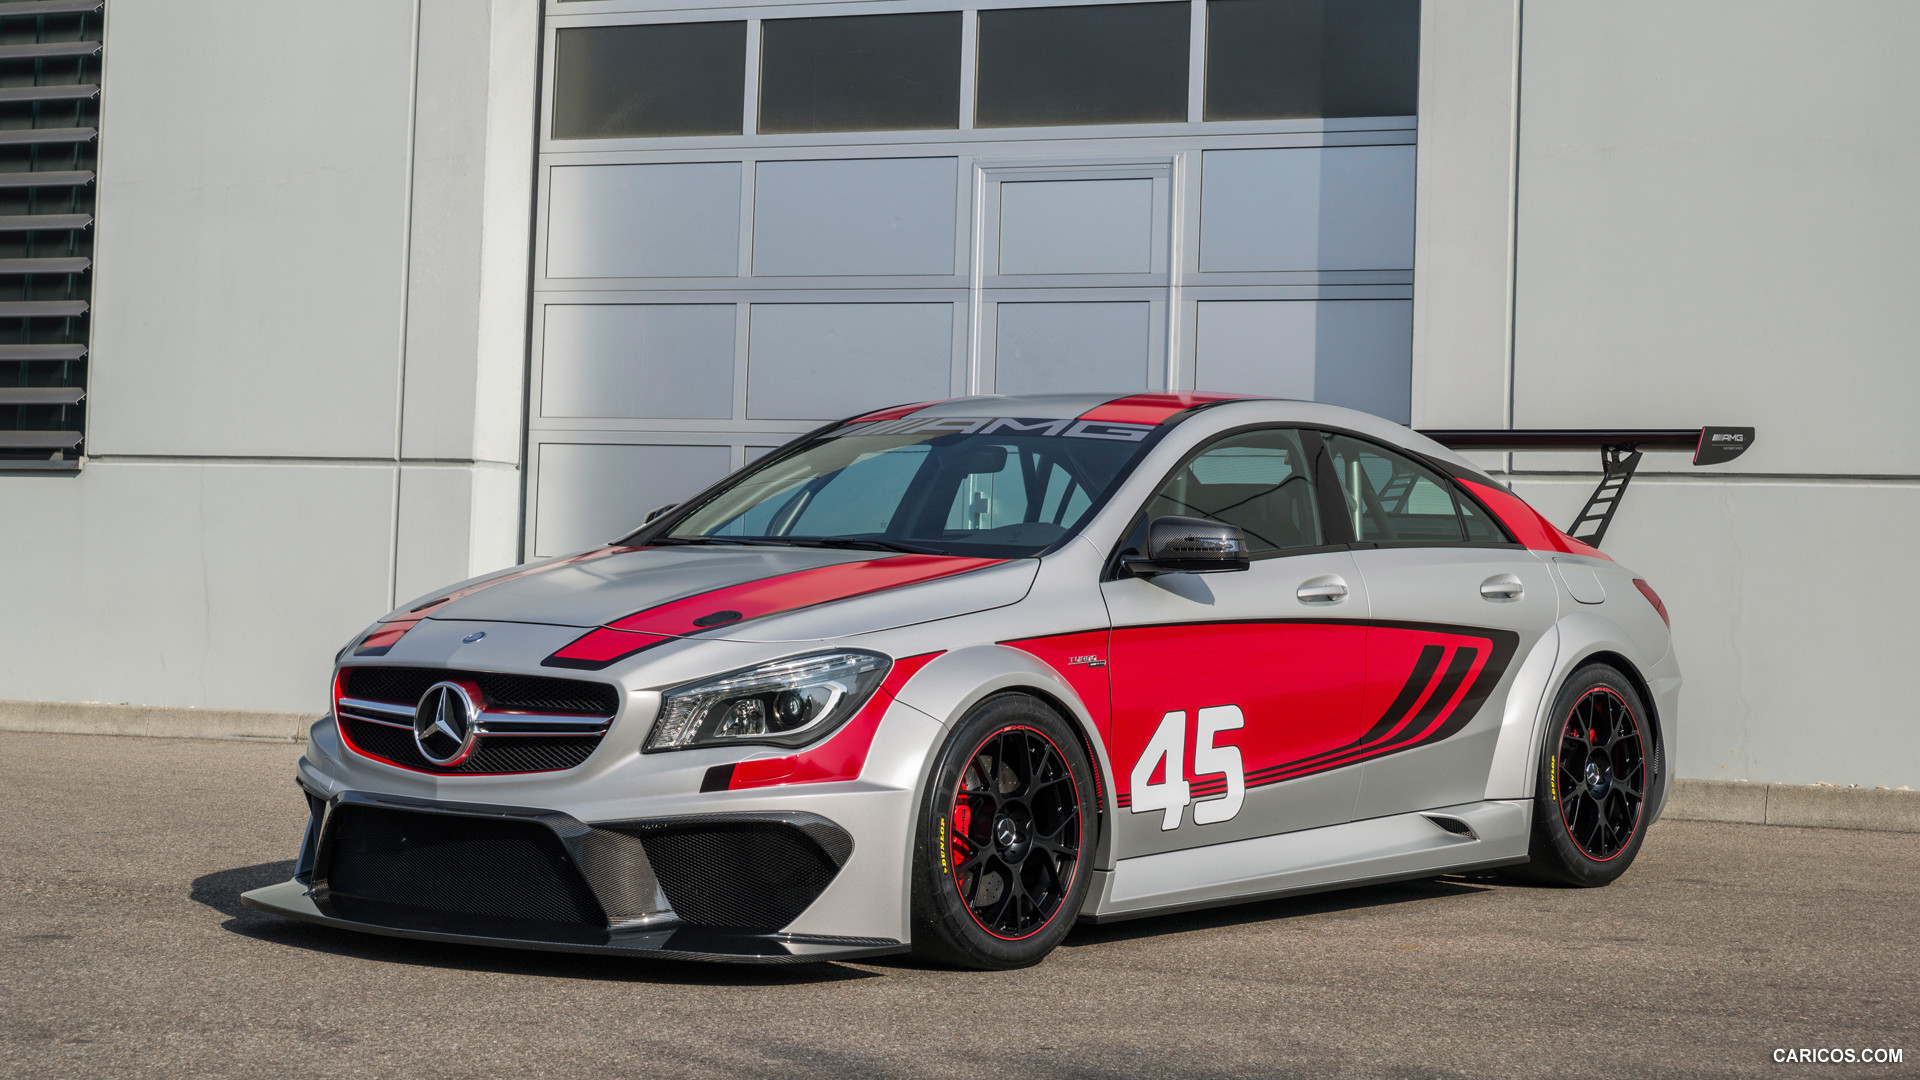 2013 Mercedes-Benz CLA 45 AMG Racing Series Concept  - Front, #3 of 26